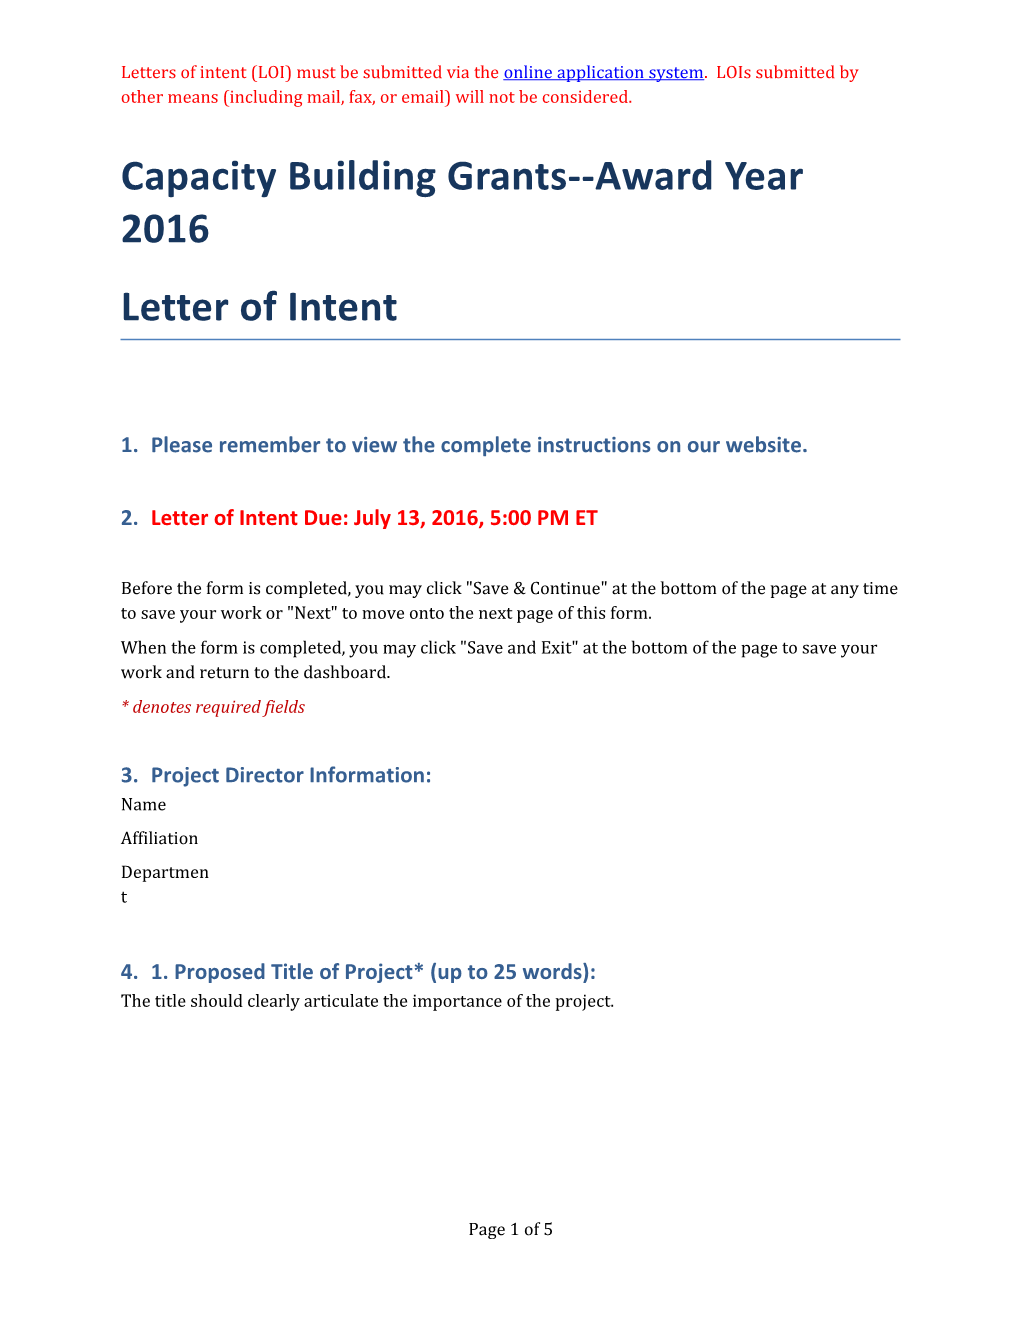 Capacity Building Grants Award Year 2016 Letter of Intent